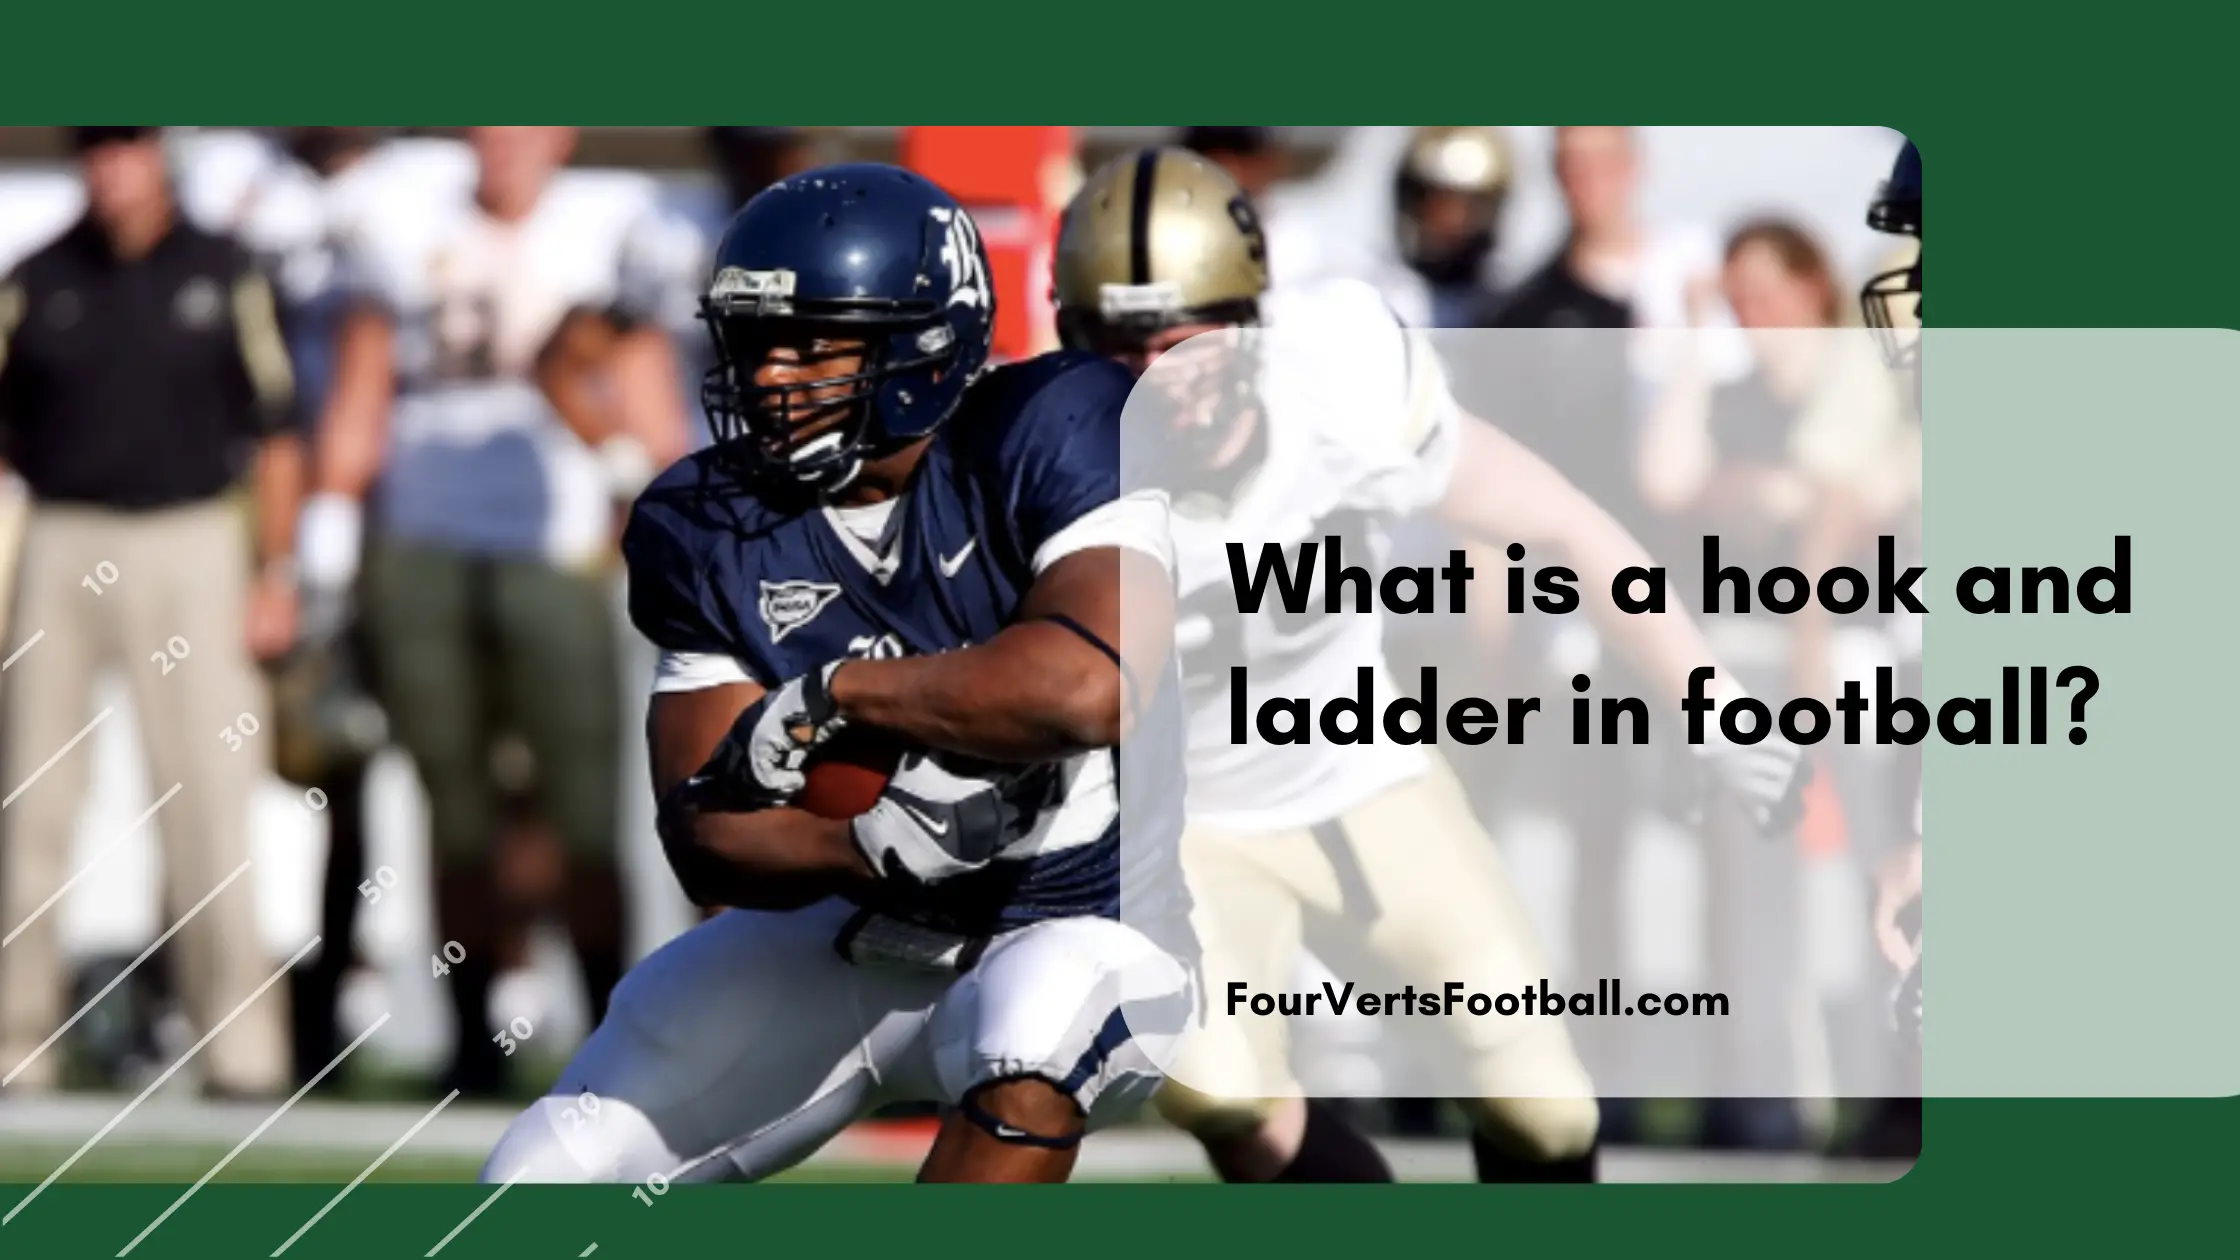 What is the hook and ladder in football?